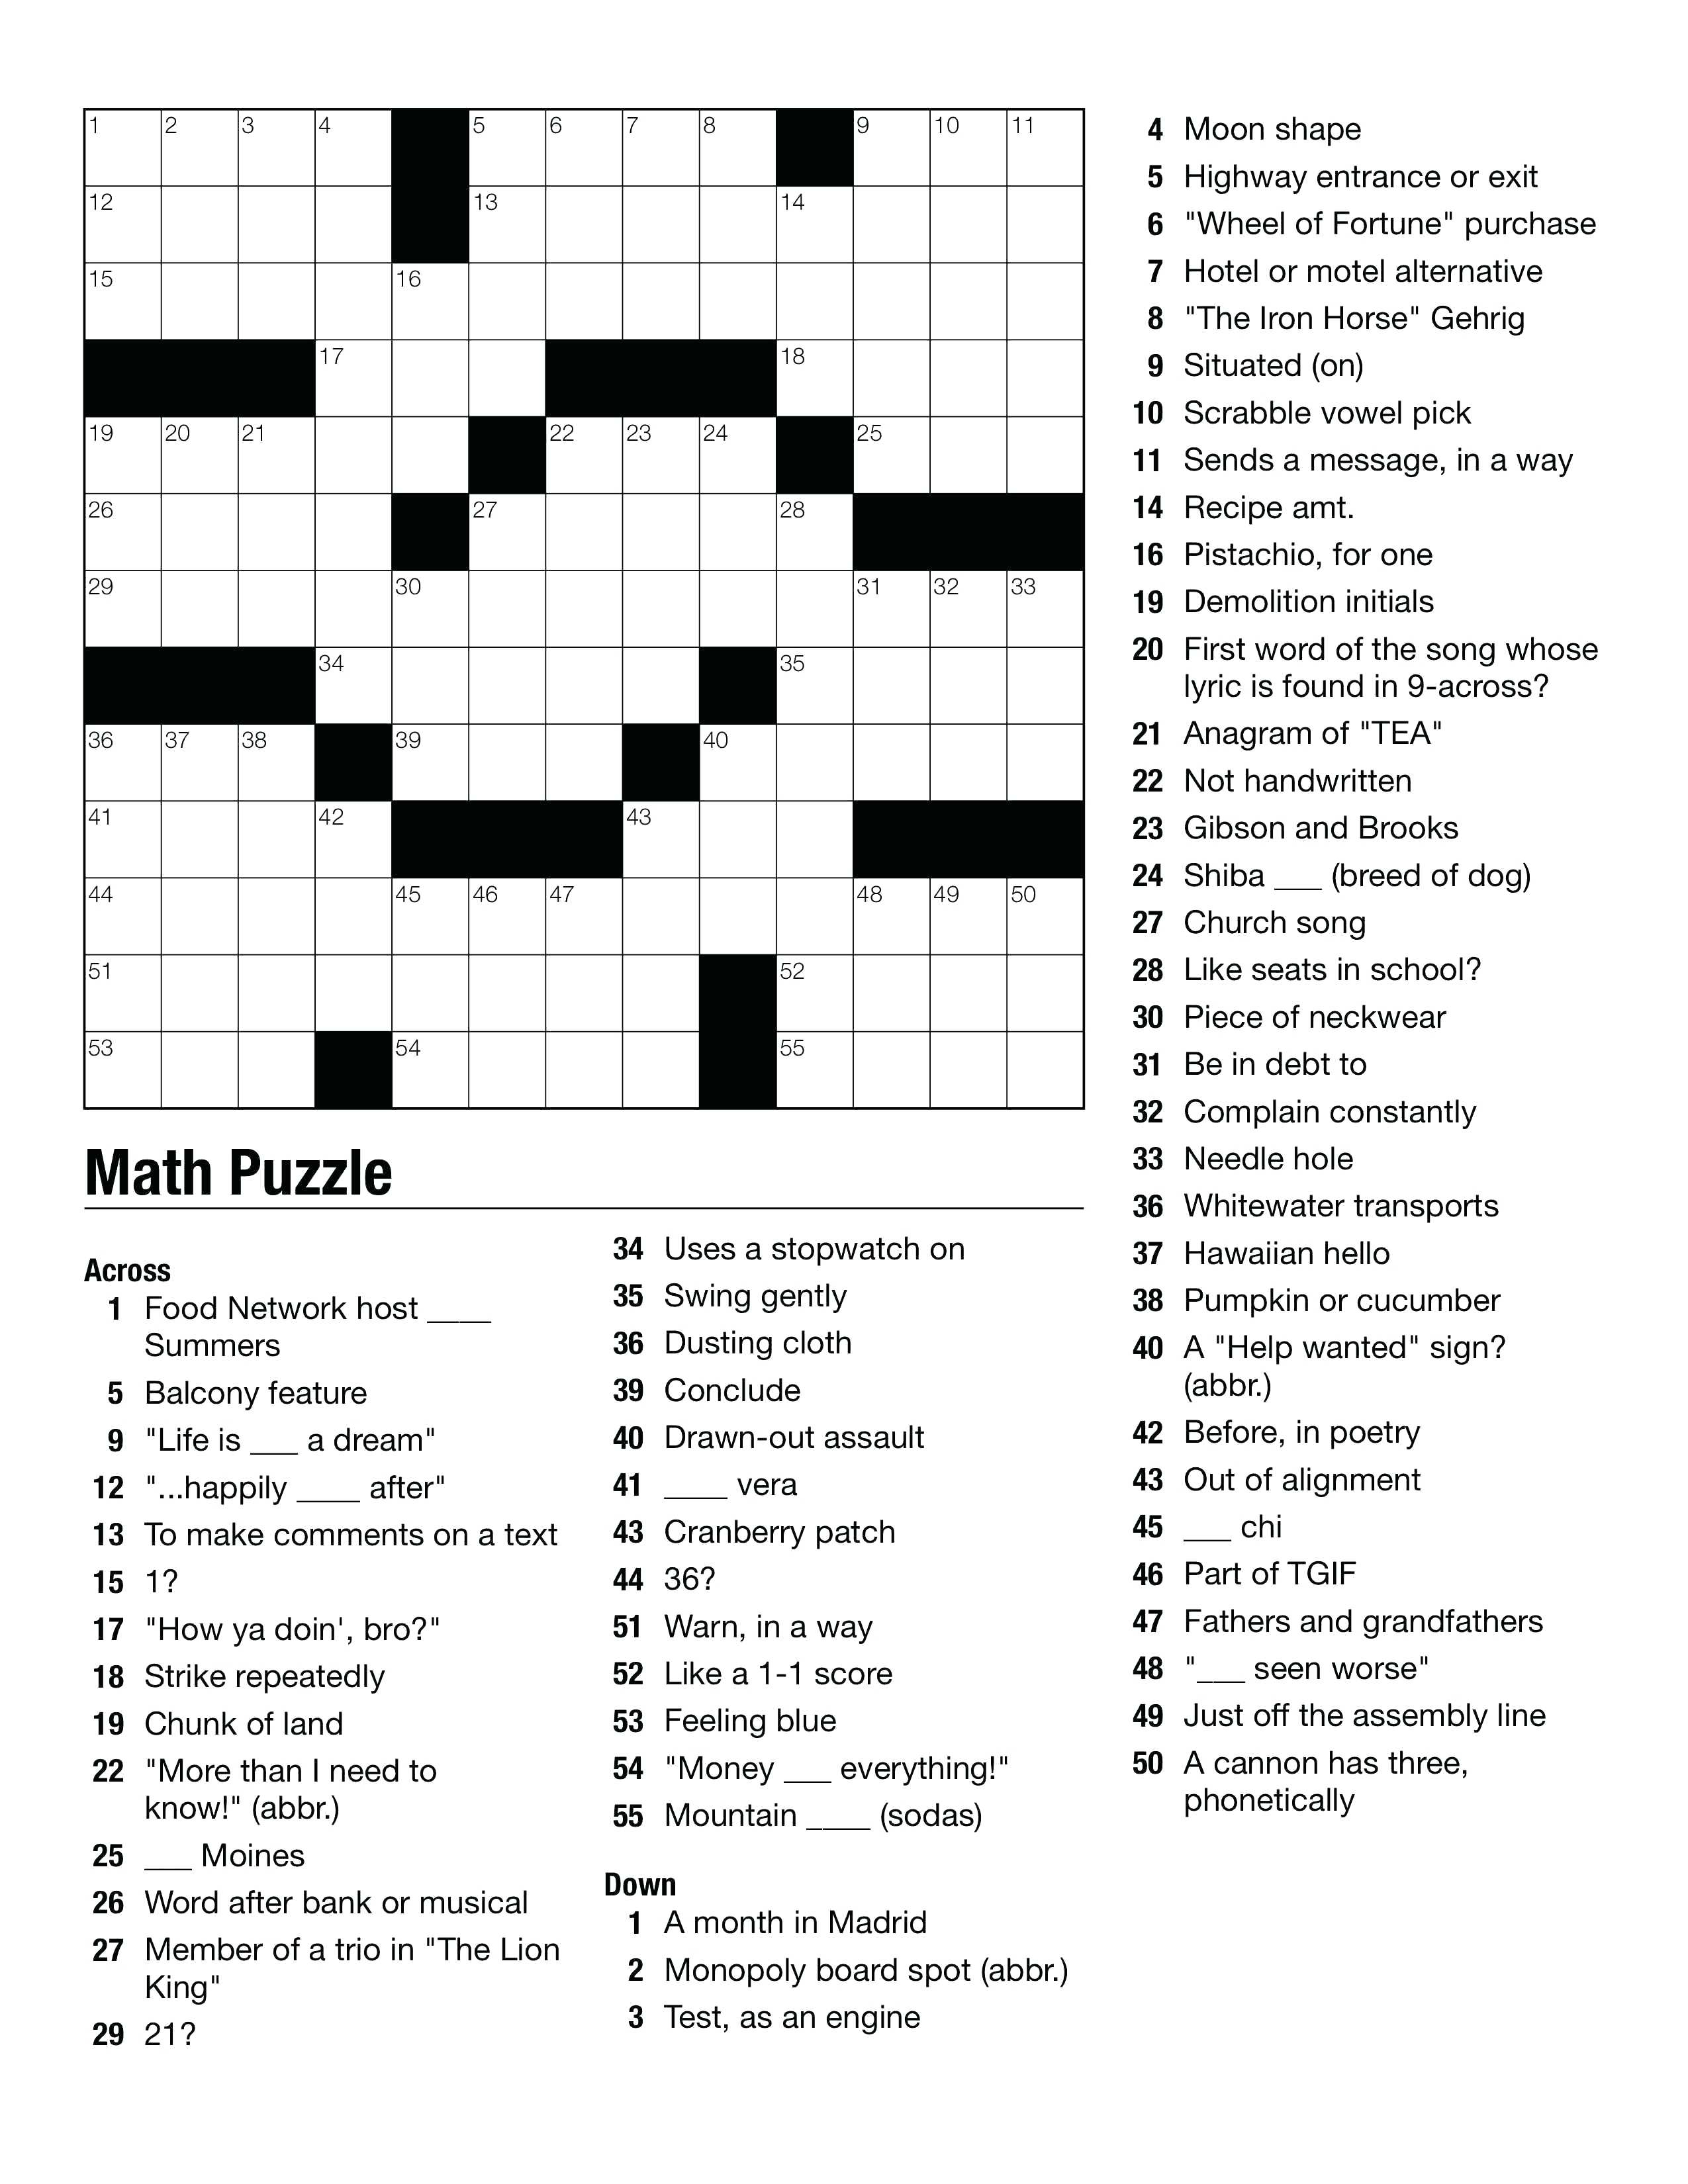 Geometry Puzzles Math Geometry Images Teaching Ideas On Crossword - Printable Crossword Middle School